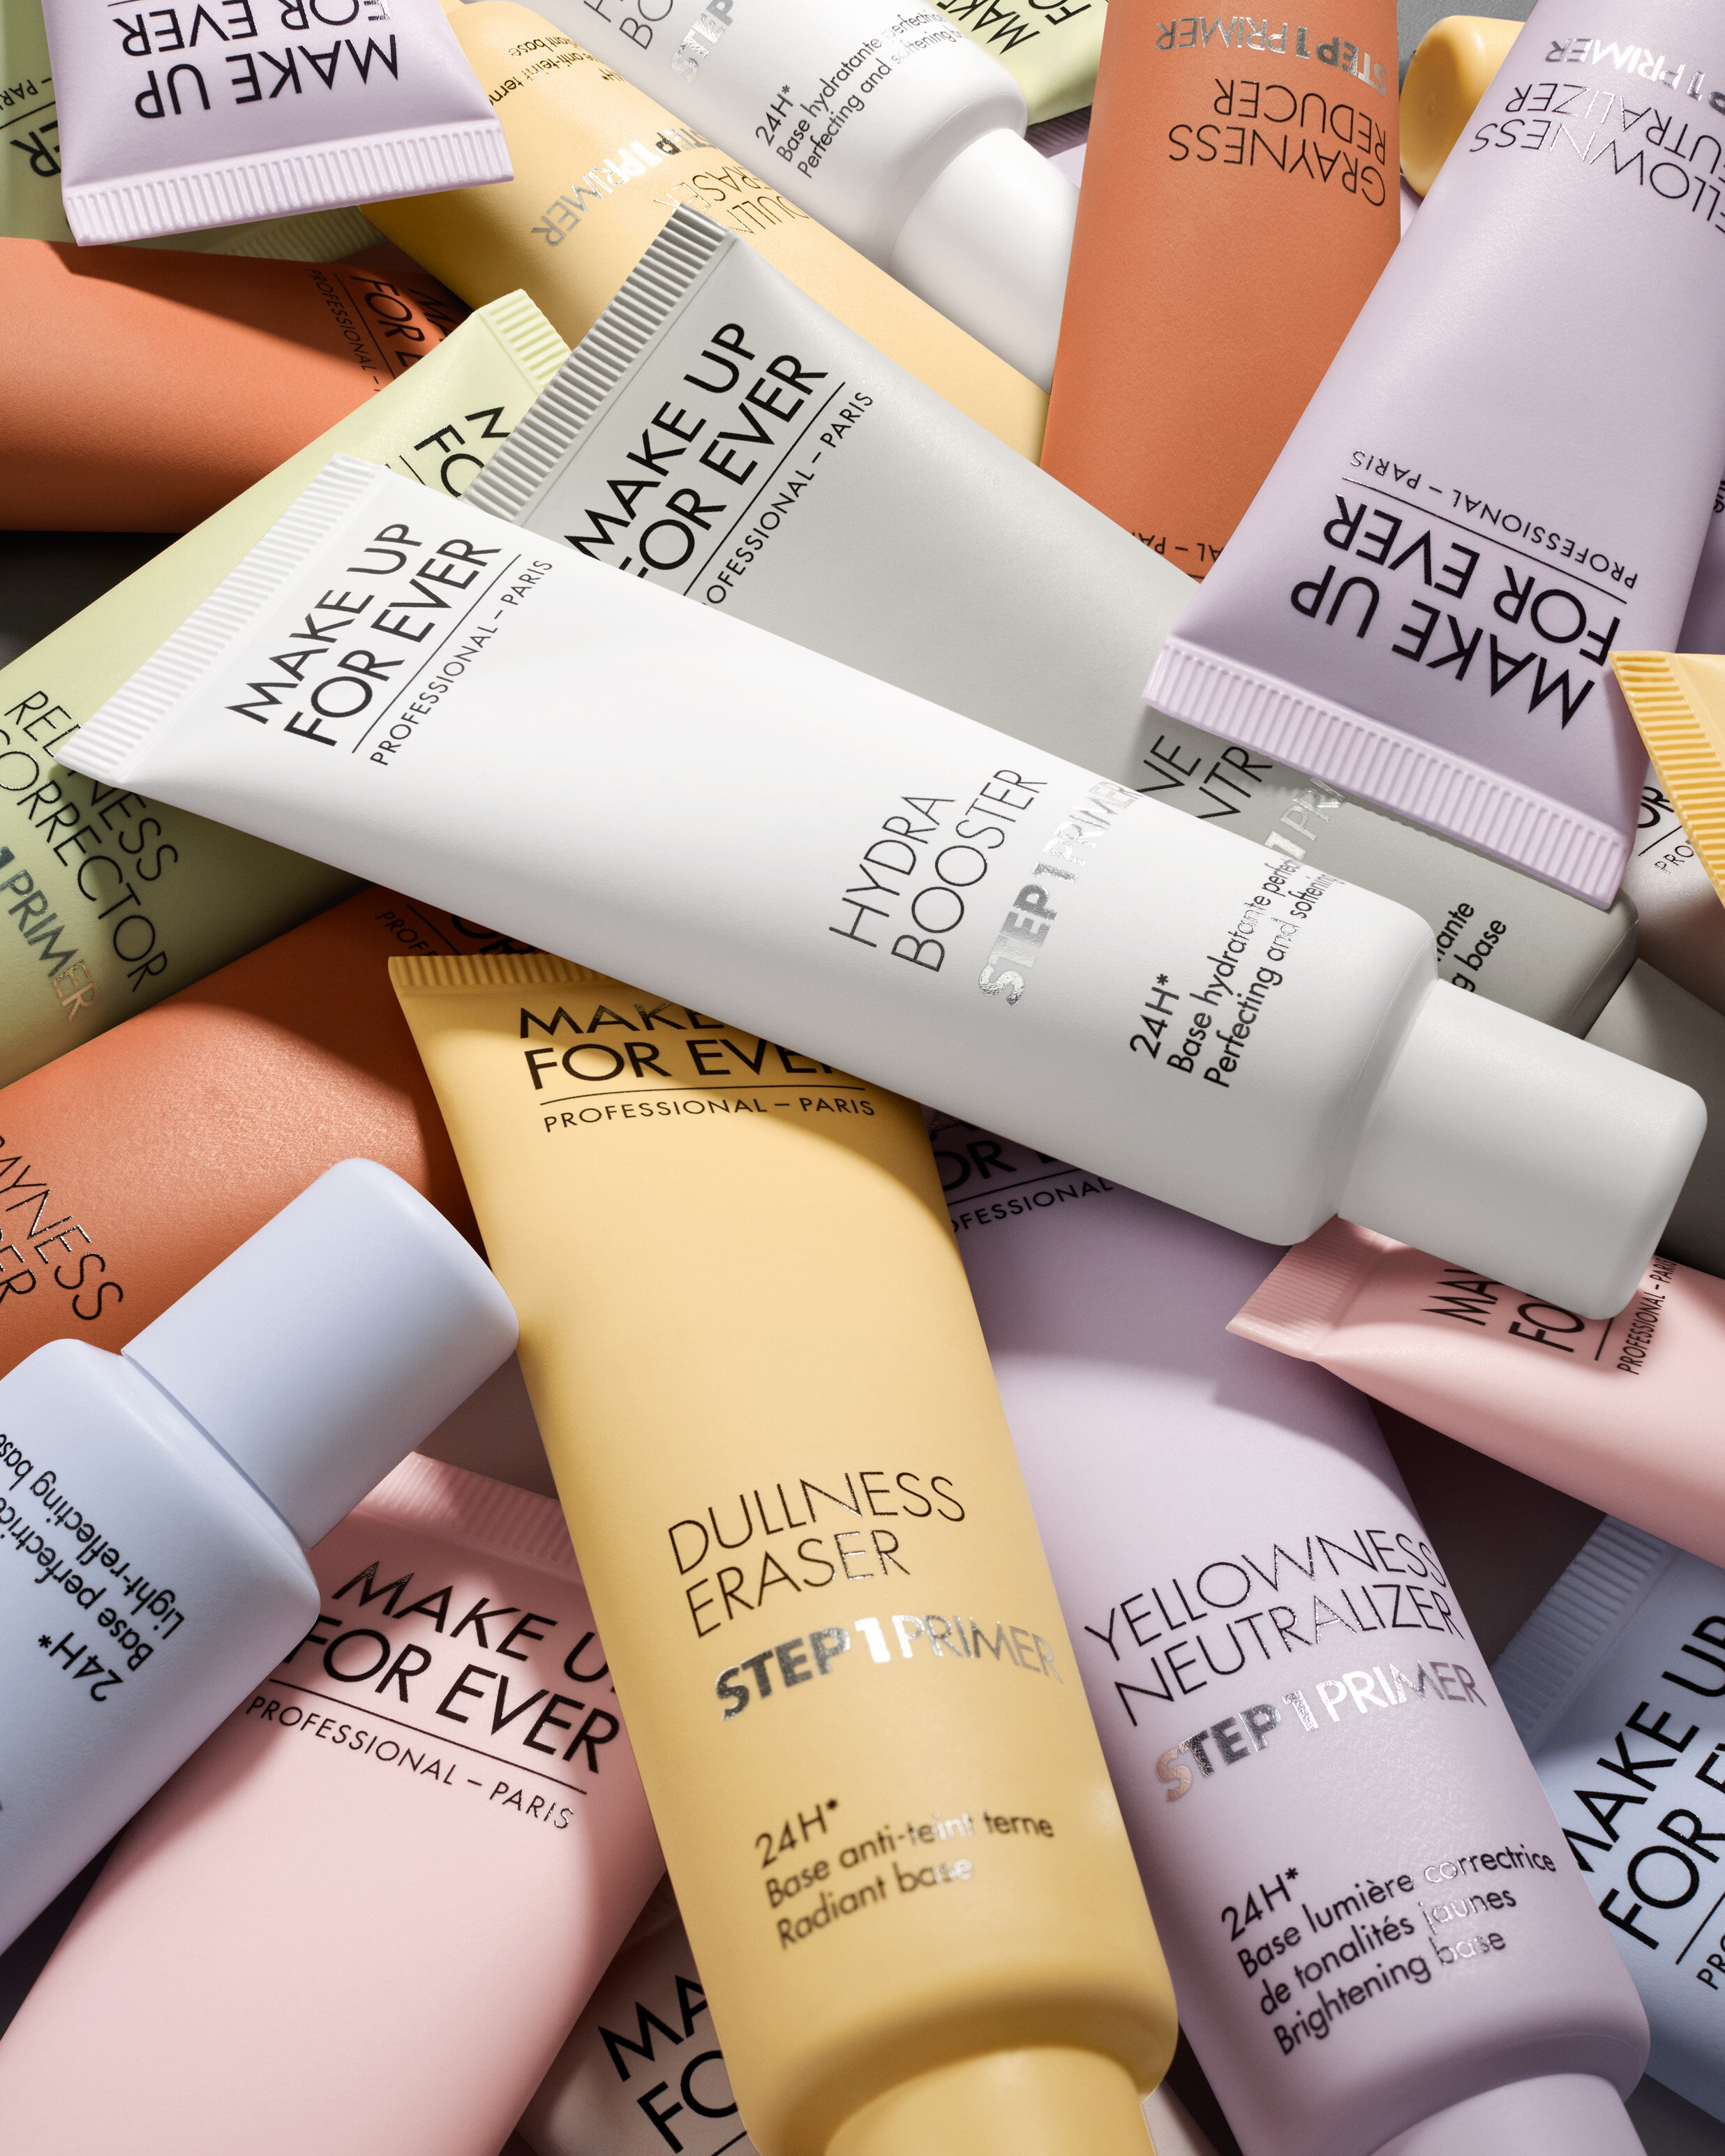 Are Makeup Forever Primers For Oily Skin? 